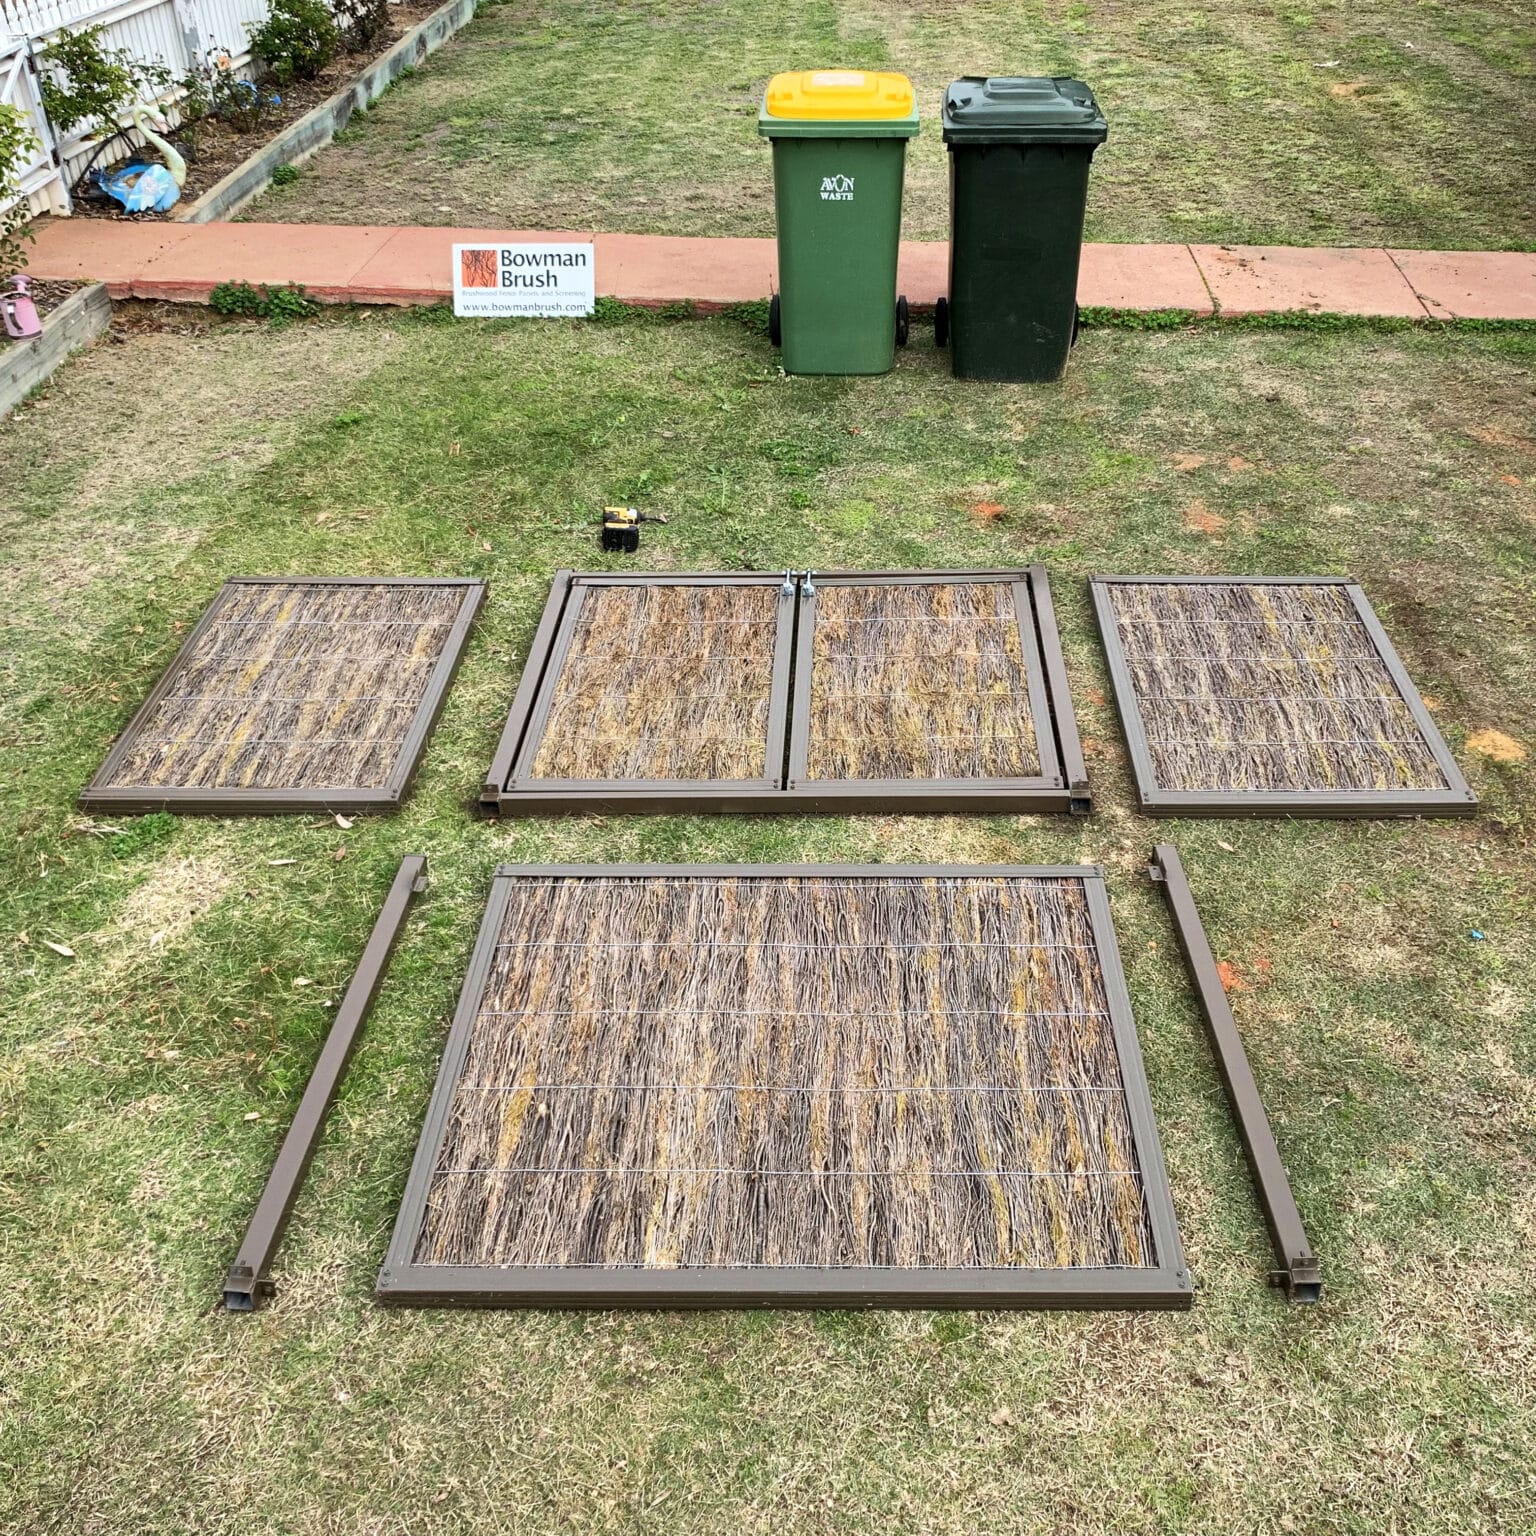 Bowman Brush bin enclosure laid out, ready to be put together